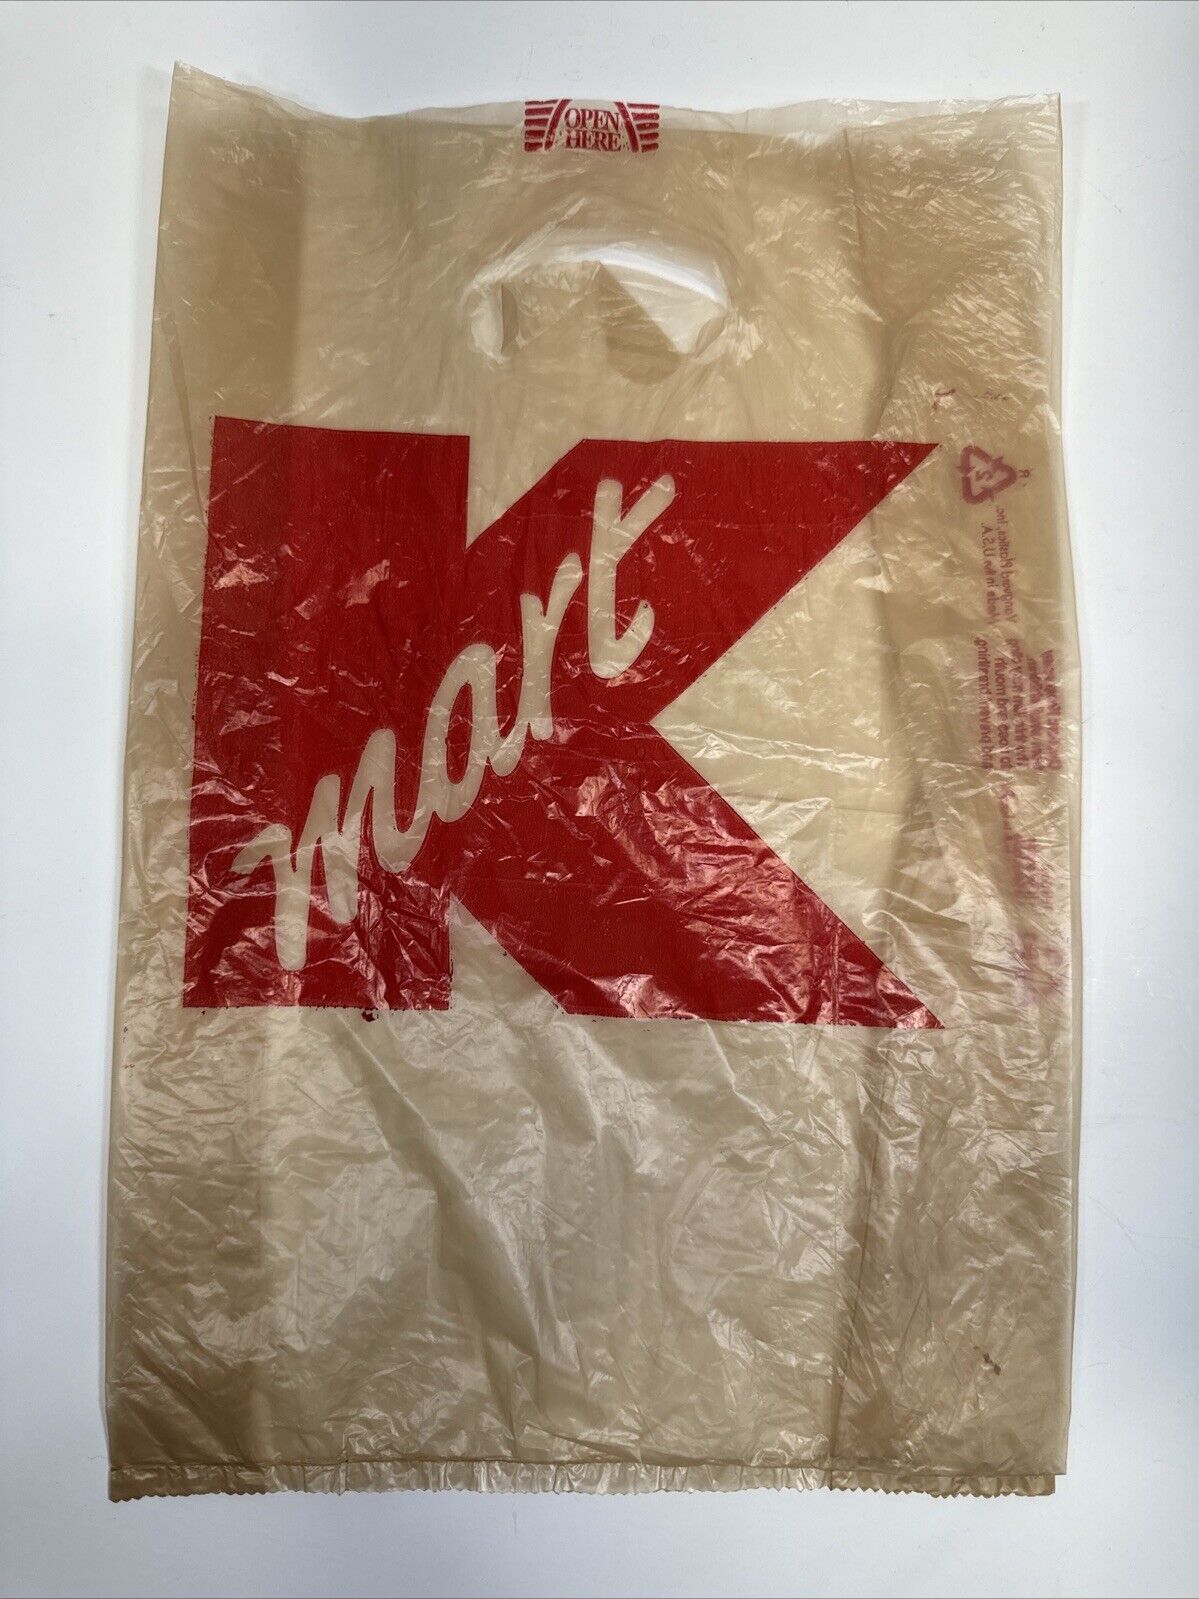 VTG KMart Brown Plastic Bag Used Good Condition 13x8.5 No Rips Tears Or Holes